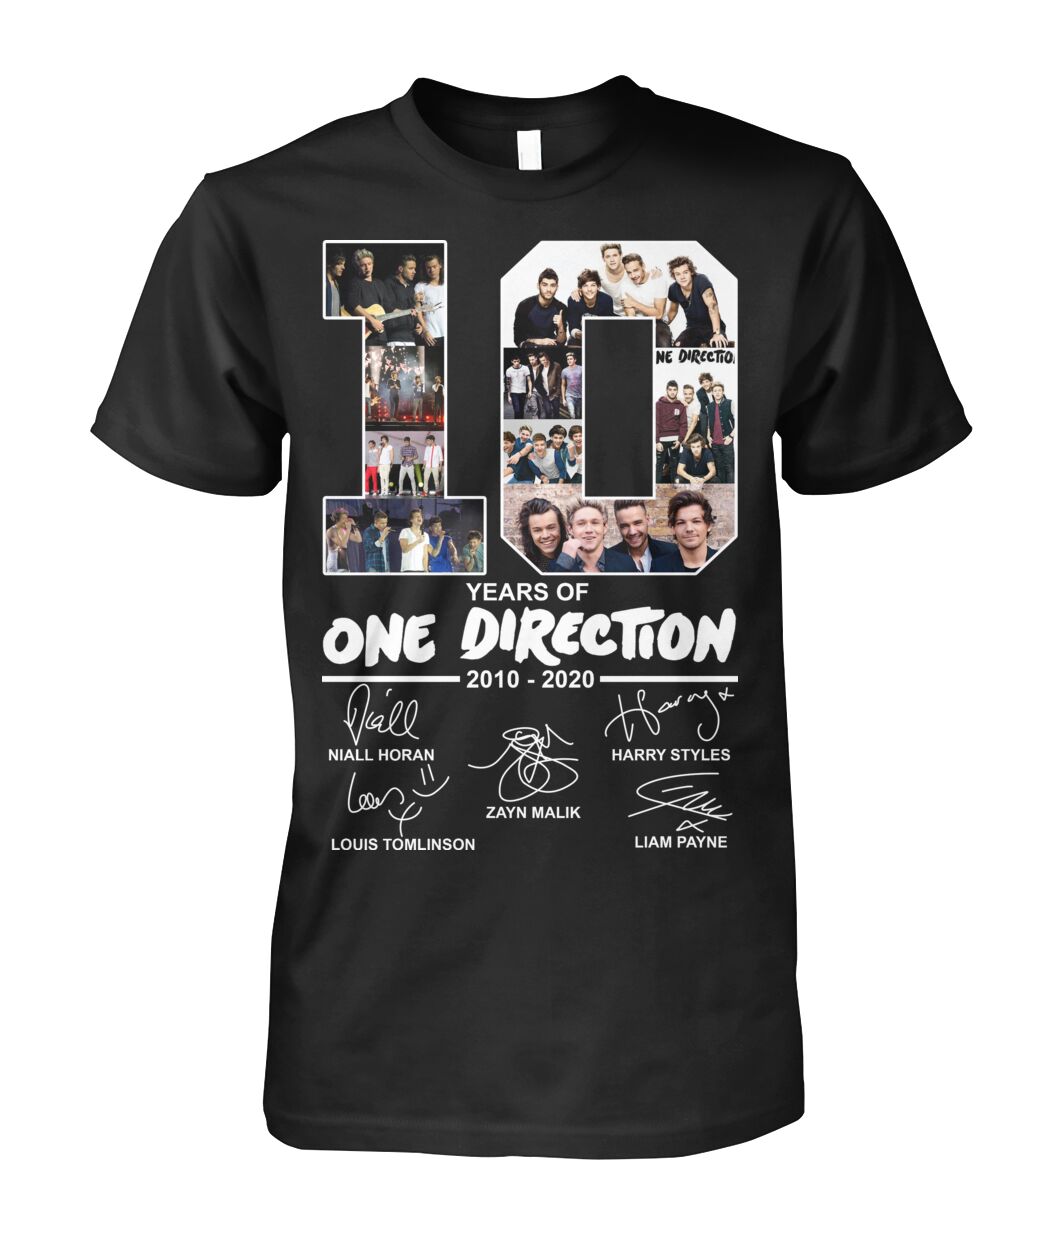 10 year of One Direction 2010 2020 shirt